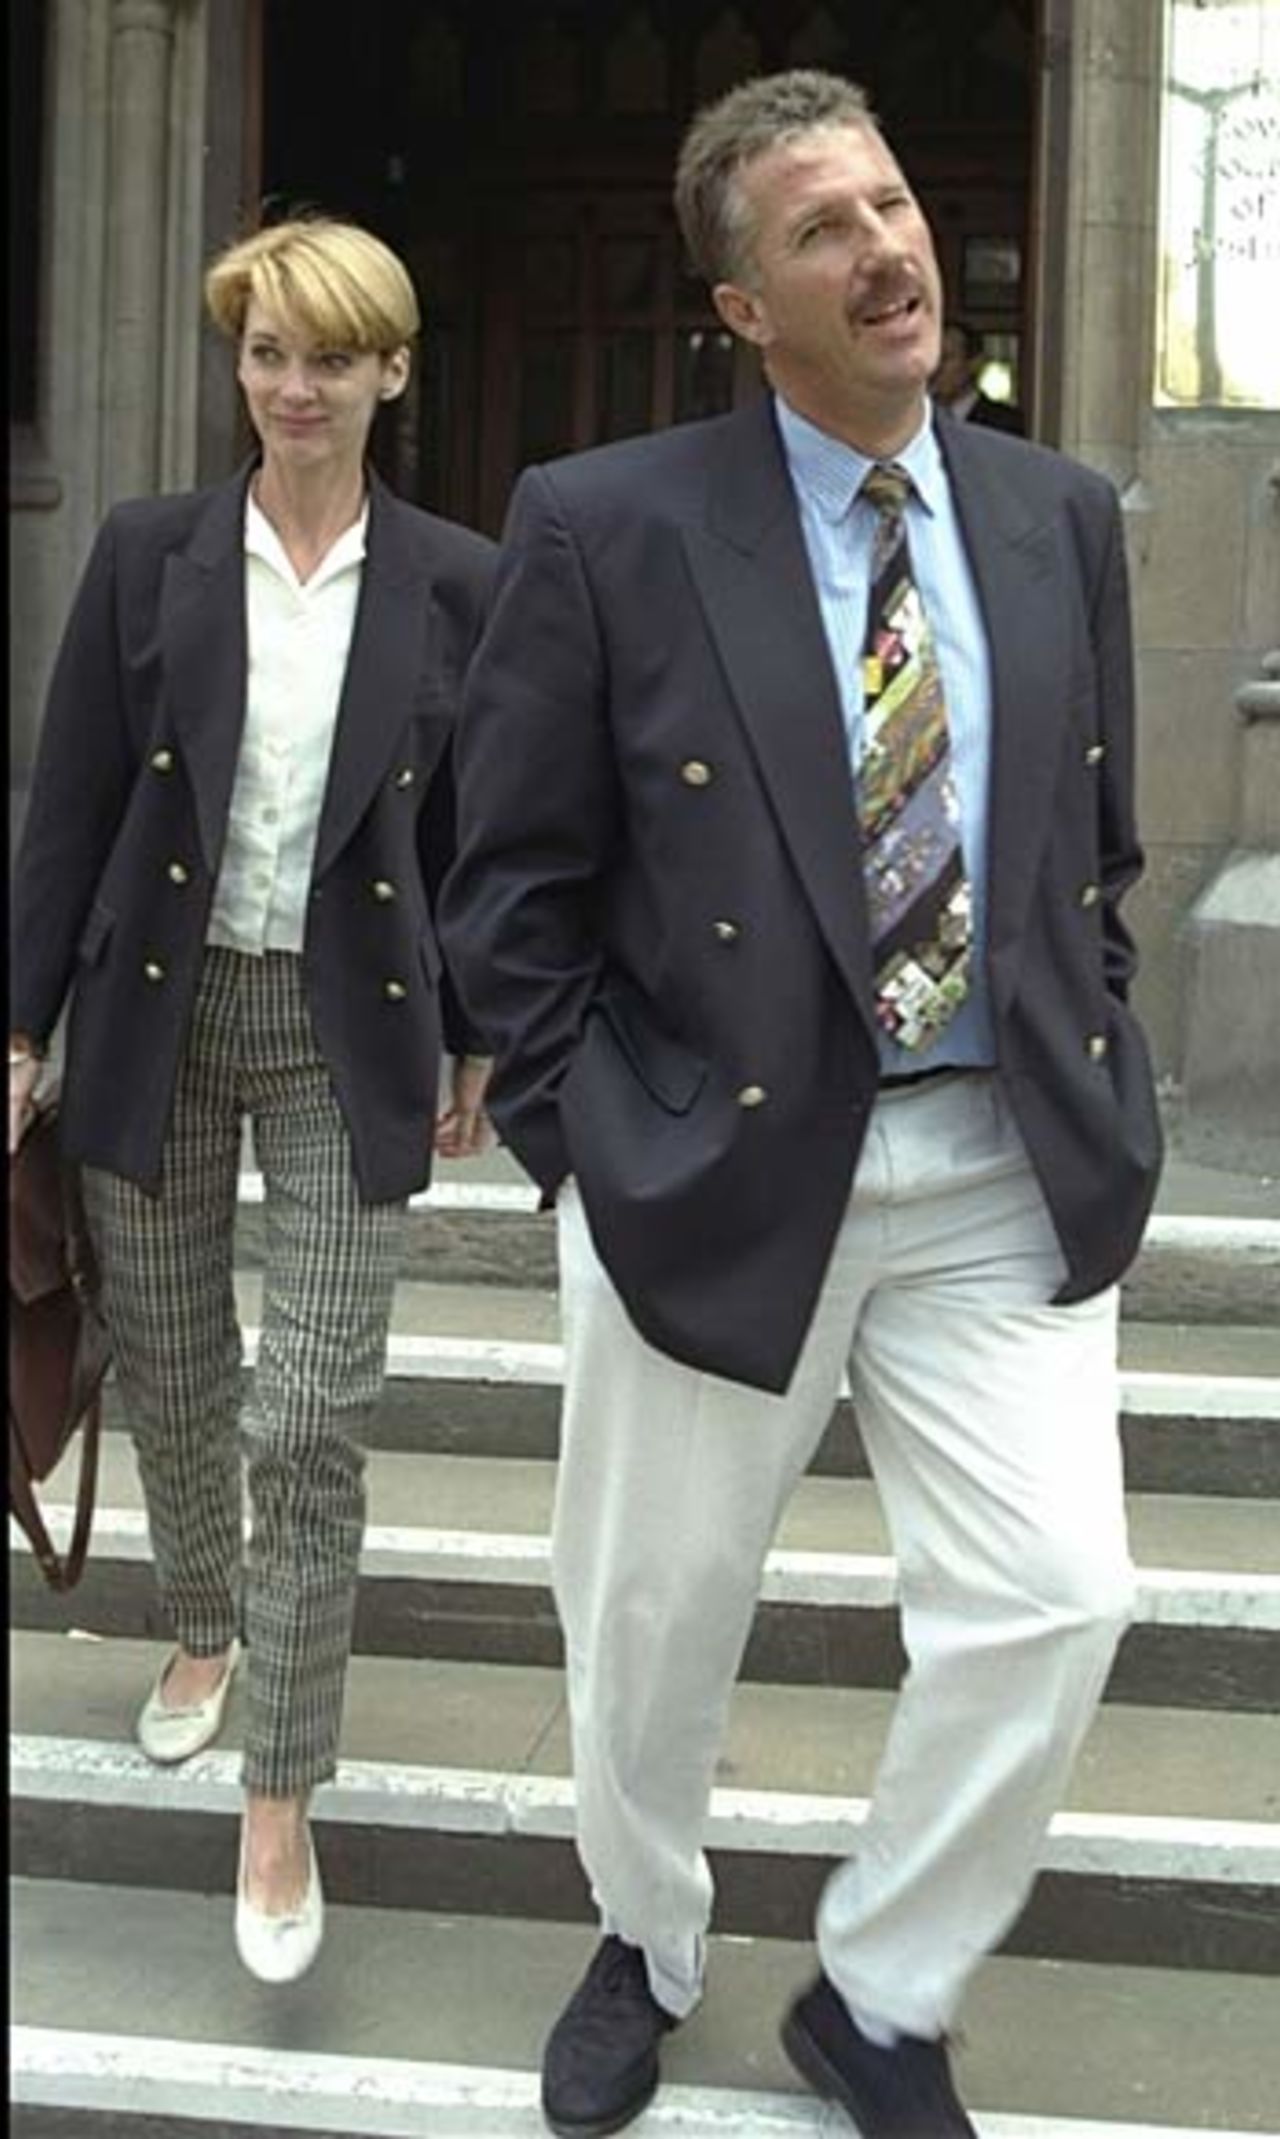 Ian Botham and his wife leave court during the Imran Khan libel case, London, July 16, 1996